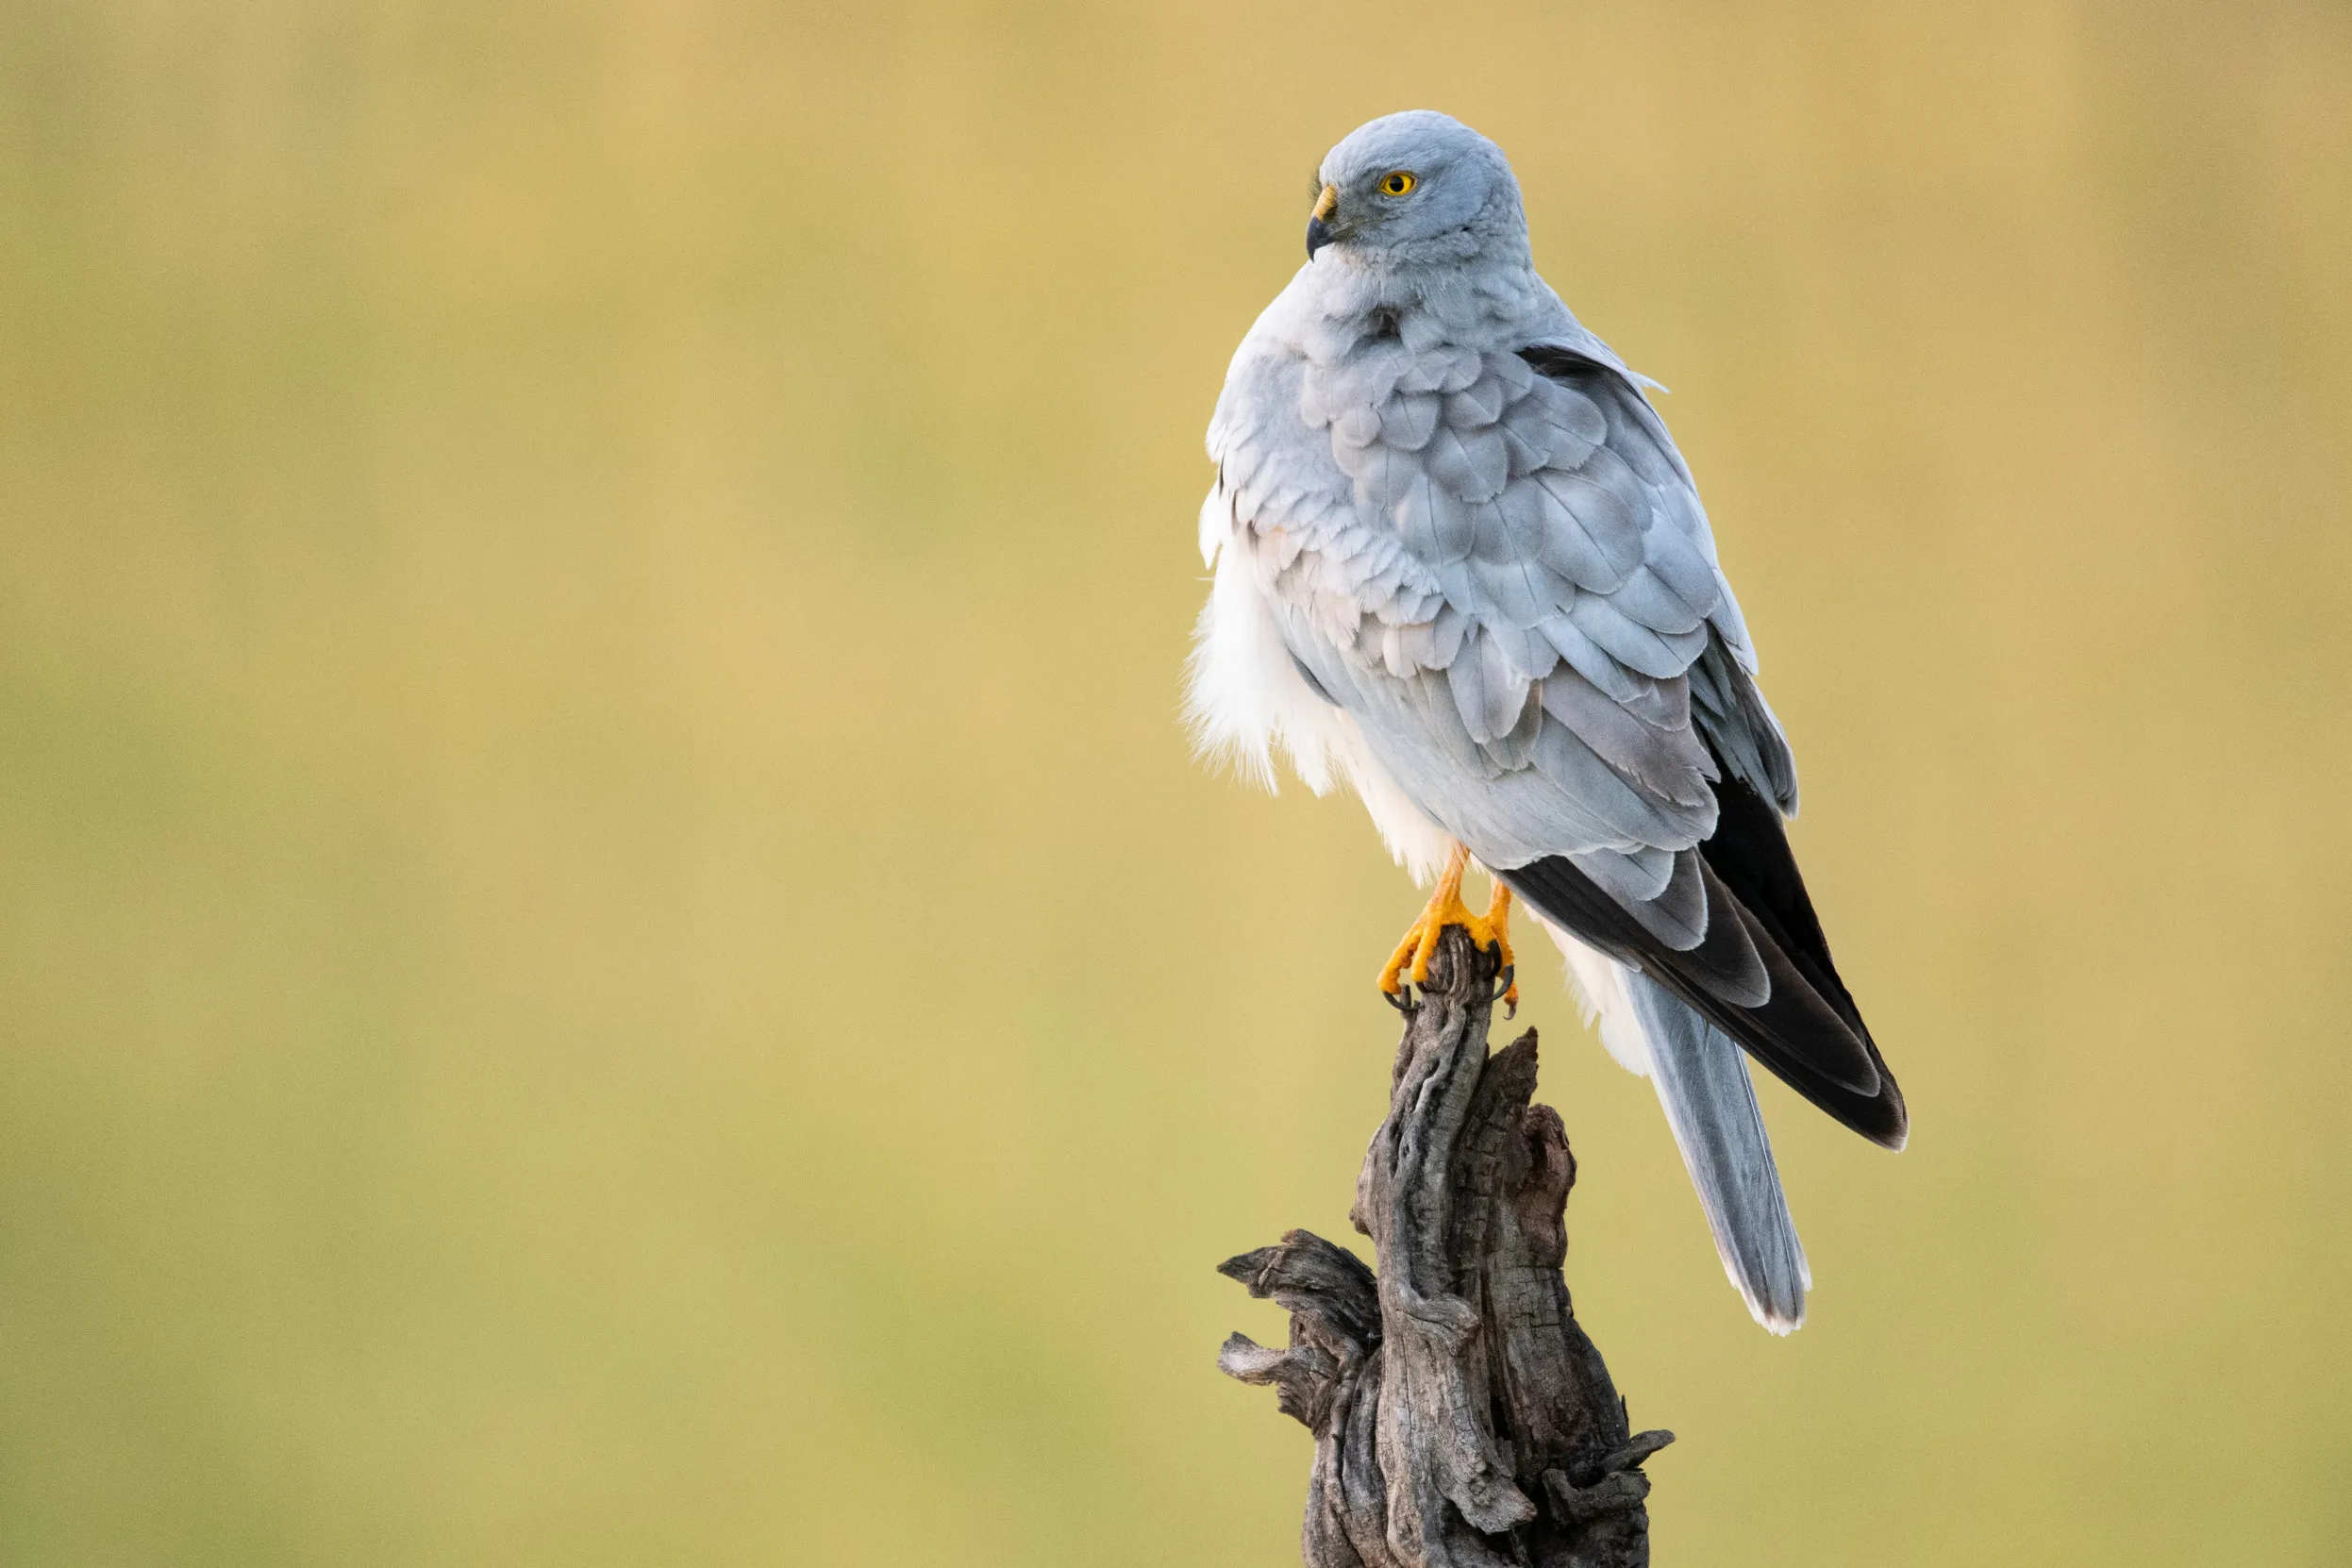 A lone male Hen Harrier perched on the end of a pointed tree branch and staring over its territory.